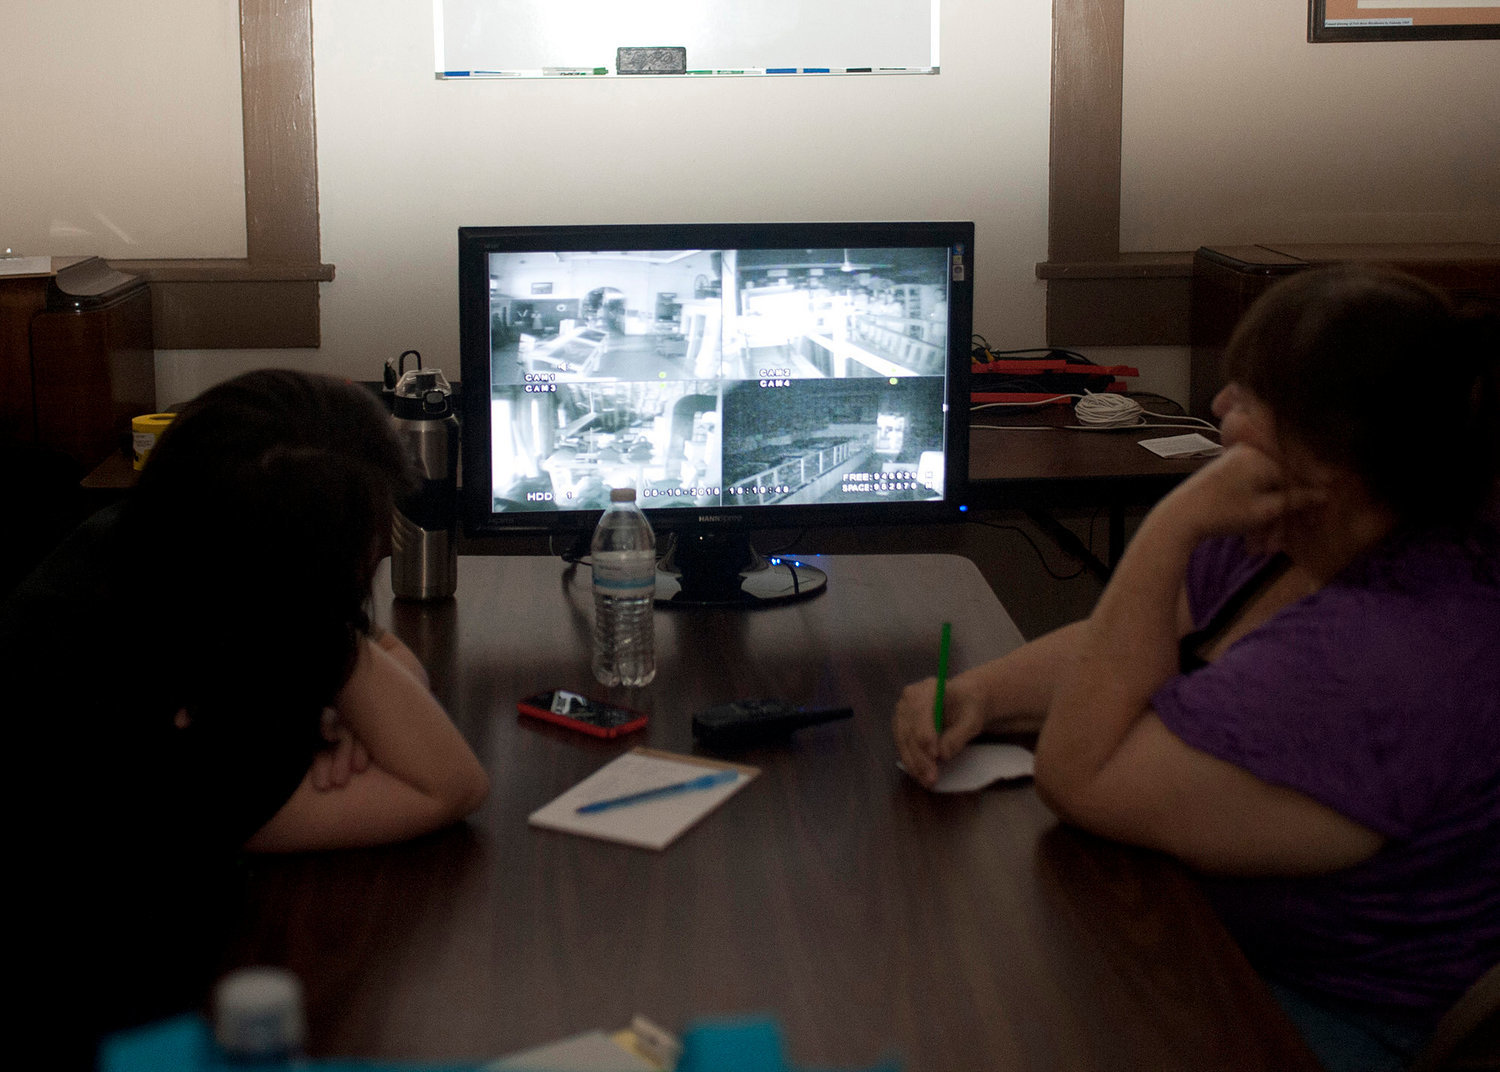 Members of South Sound Paranormal Research watch live video feed from infrared cameras placed in strategic locations during a paranormal investigation at the Lewis County Historical Museum in 2015.